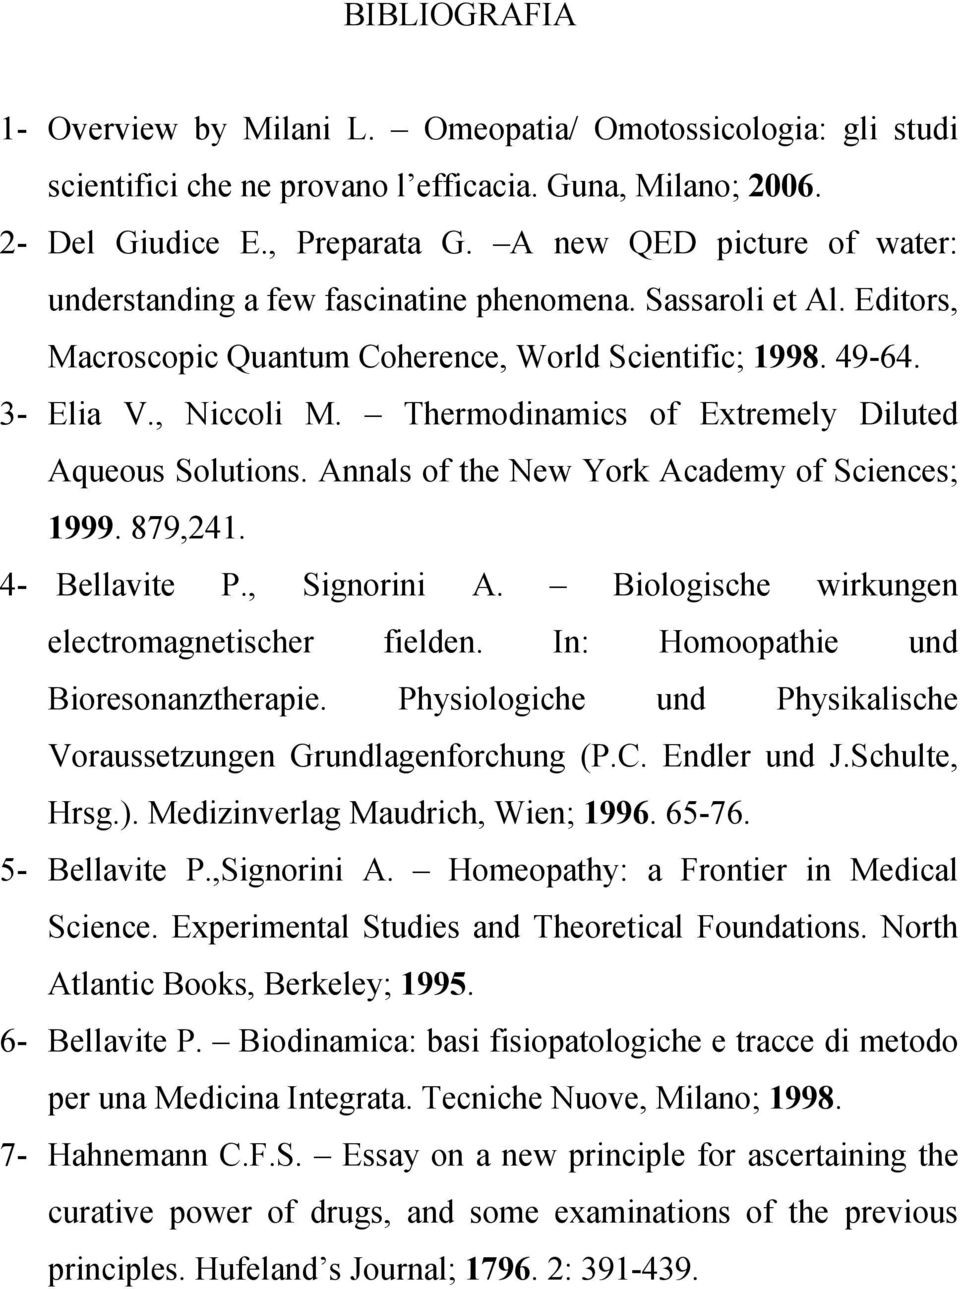 Thermodinamics of Extremely Diluted Aqueous Solutions. Annals of the New York Academy of Sciences; 1999. 879,241. 4- Bellavite P., Signorini A. Biologische wirkungen electromagnetischer fielden.